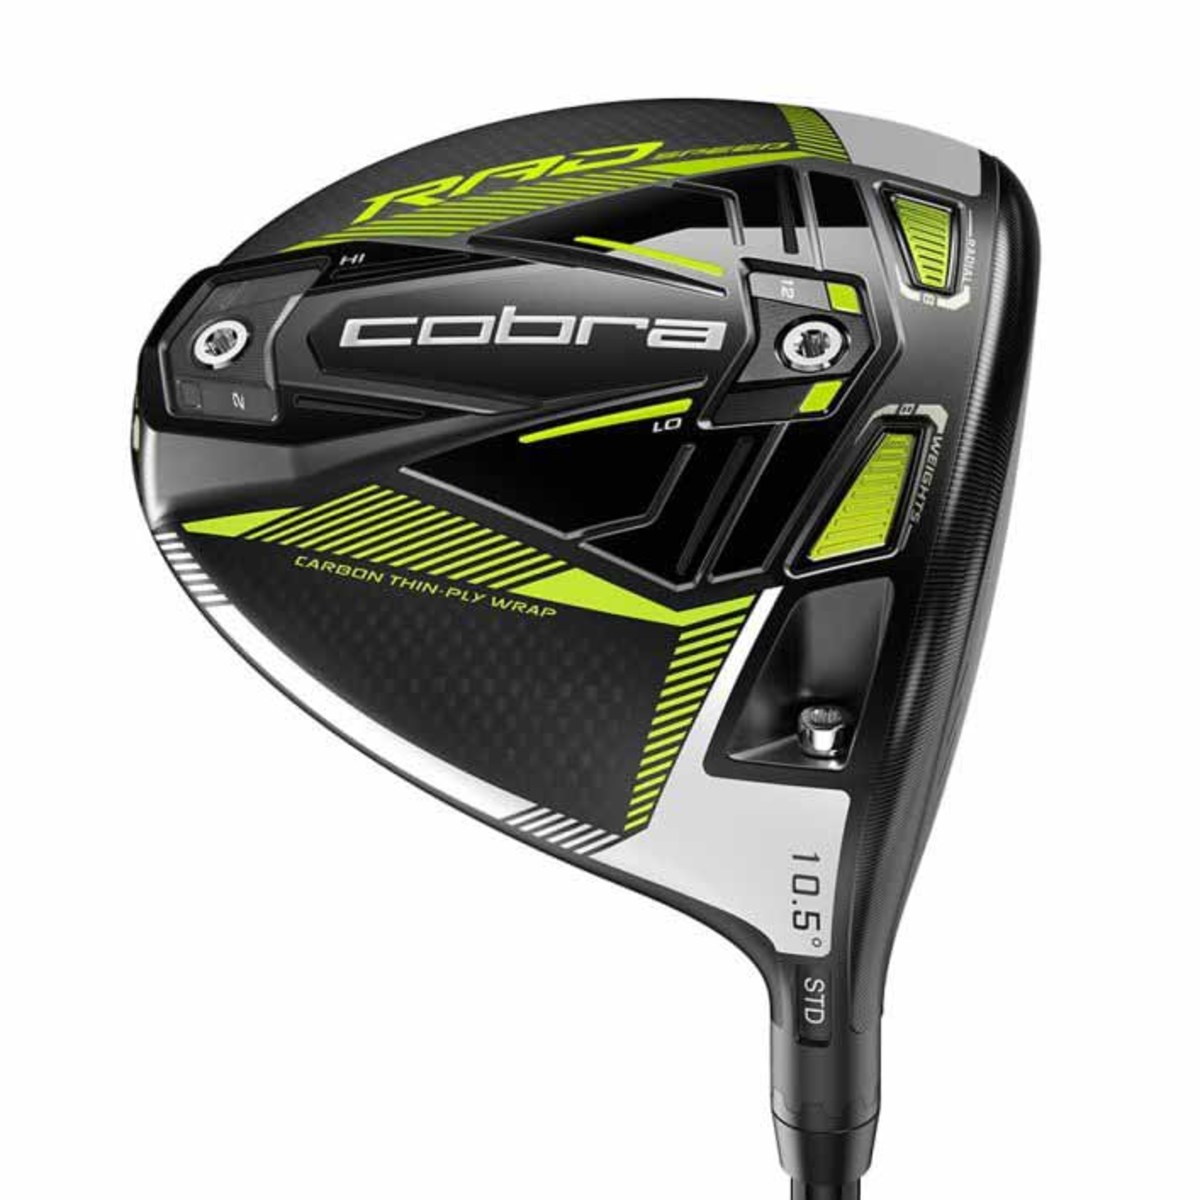 Shop the latest Cobra golf drivers - like the RADSPEED - on Morning Read's online pro shop.